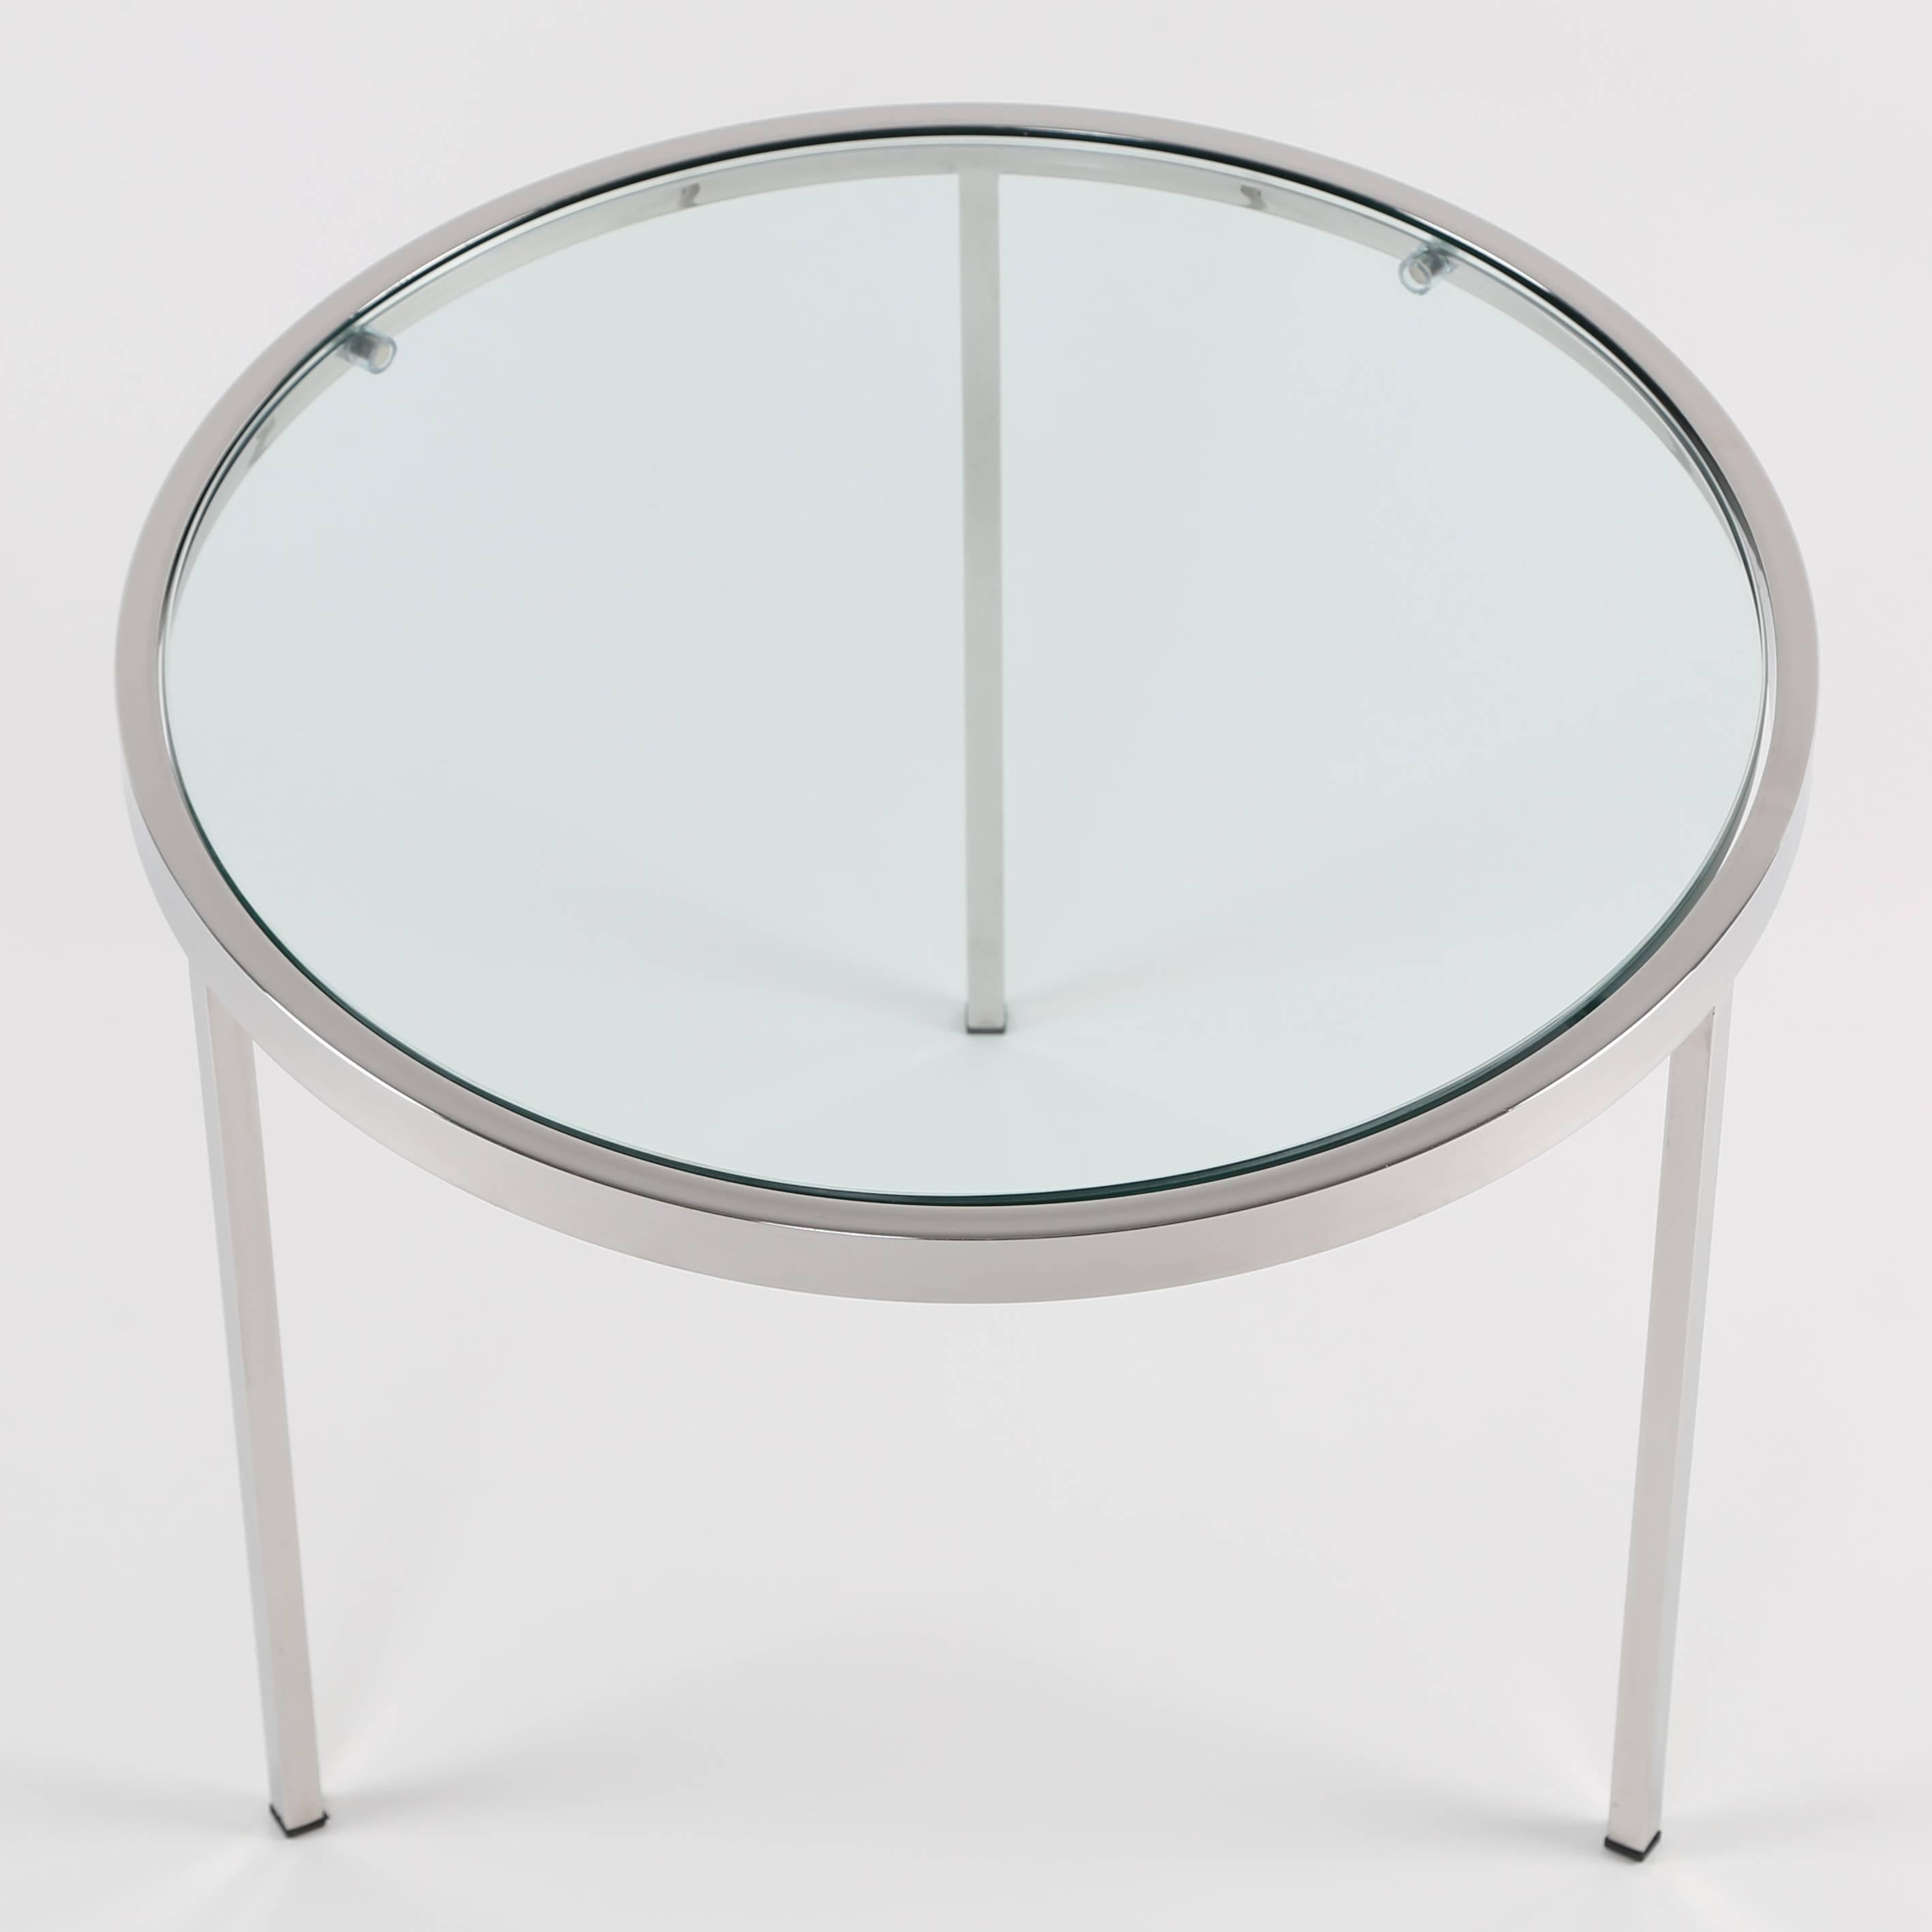 American Milo Baughman Round Chrome Side Table with Inset Glass Top, circa 1970s